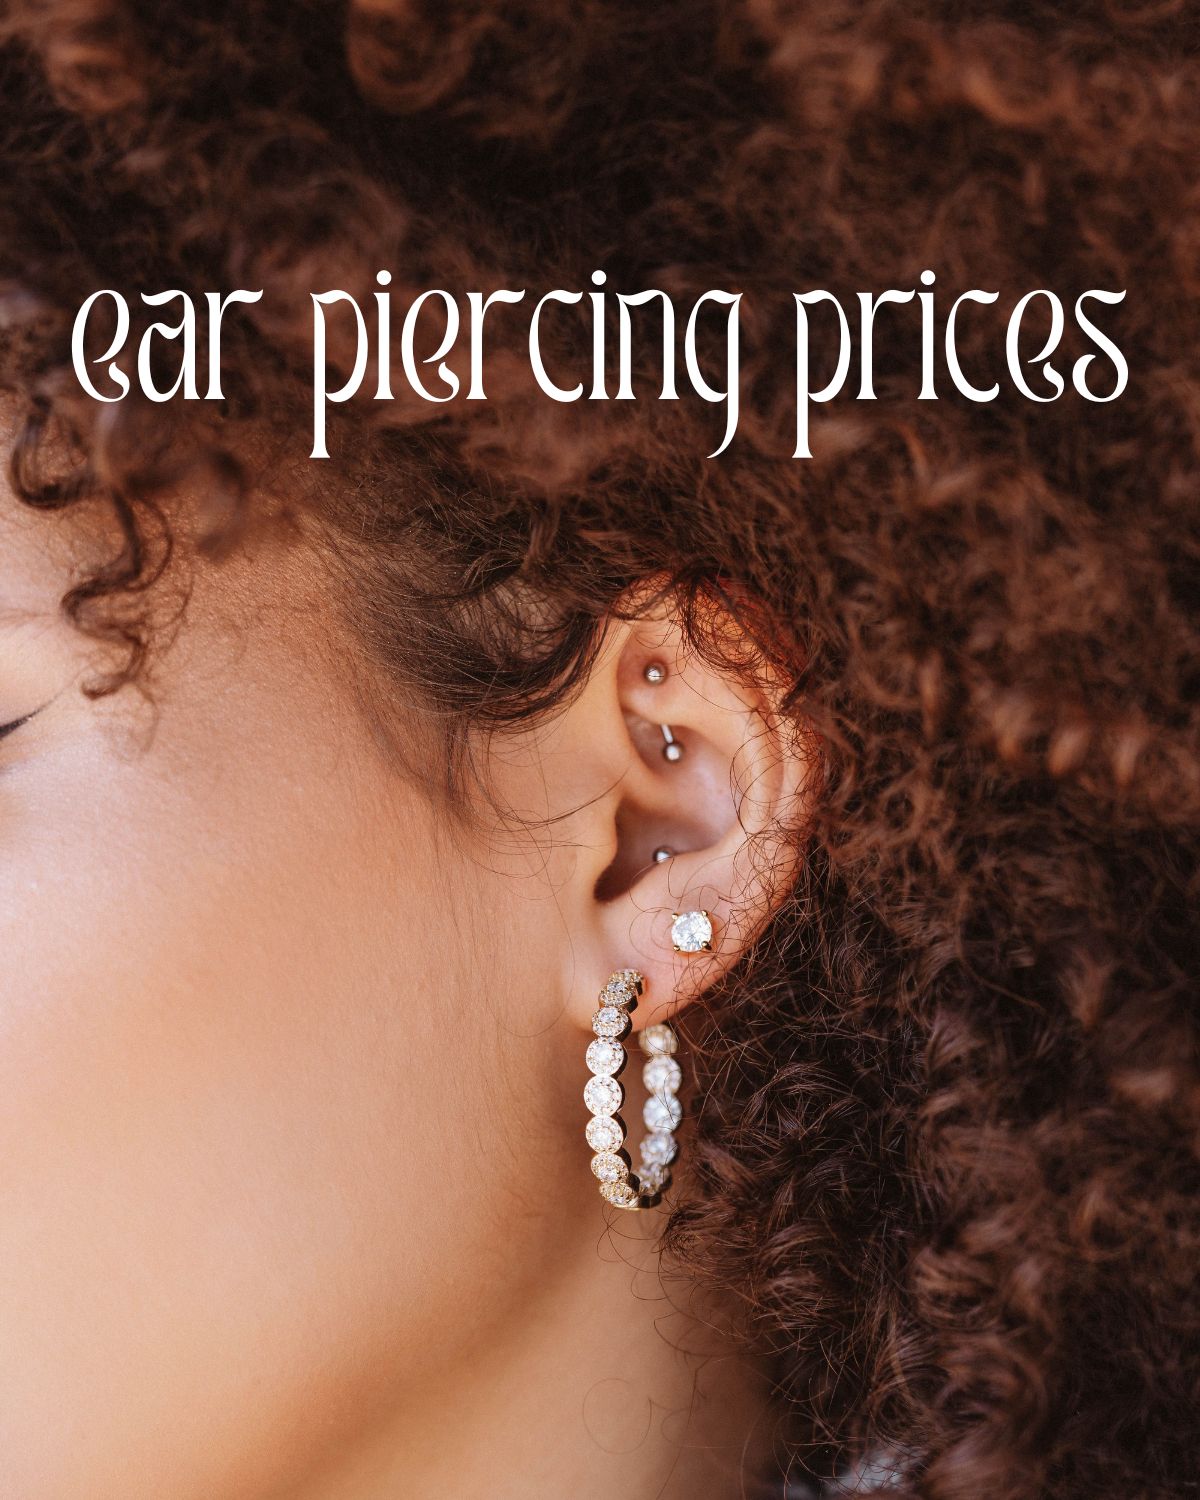 A girl with several ear piercings